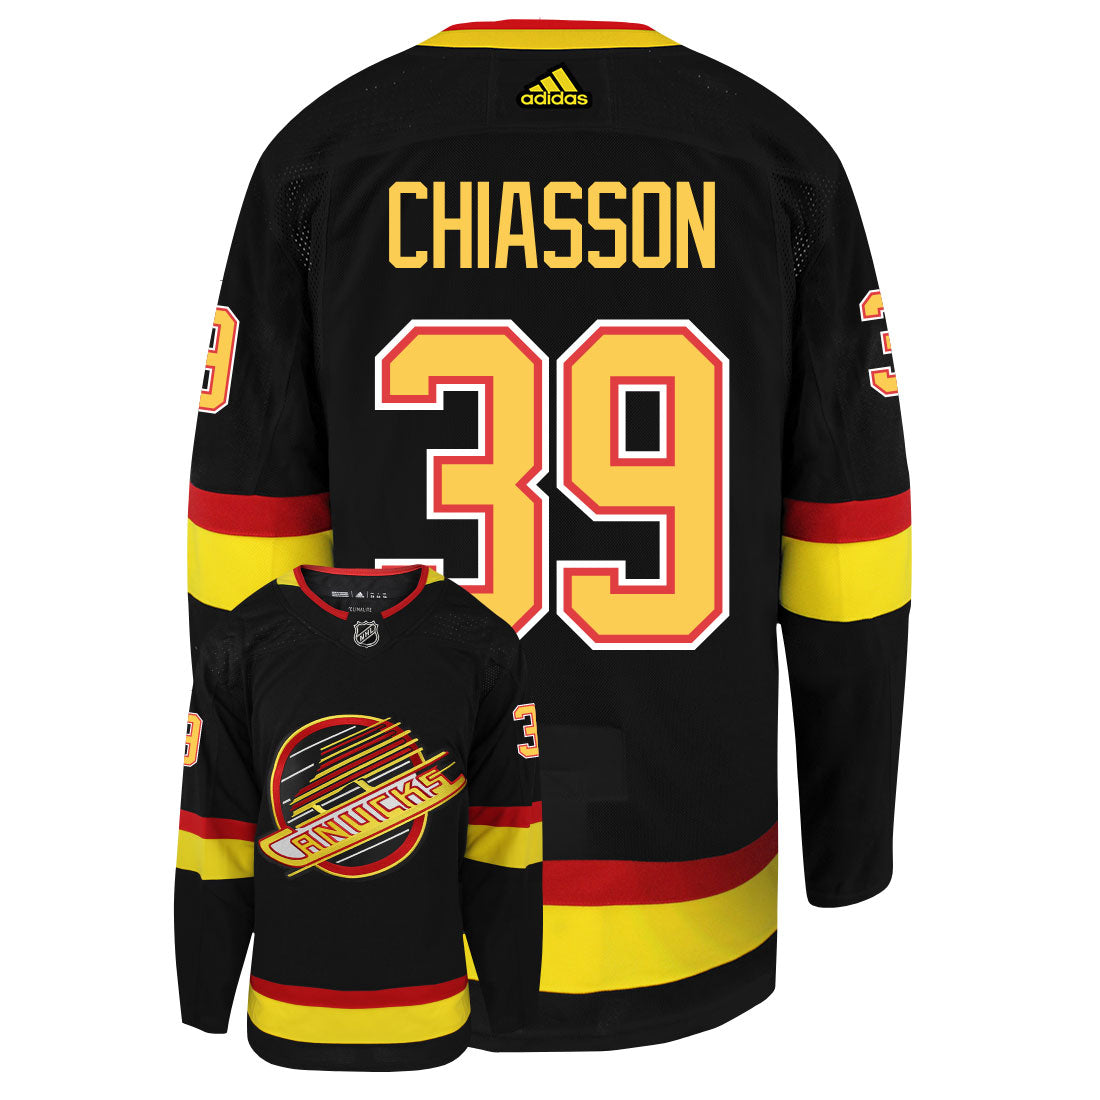 Alex Chiasson Vancouver Canucks Adidas Primegreen Authentic Third Alternate NHL Hockey Jersey - Back/Front View